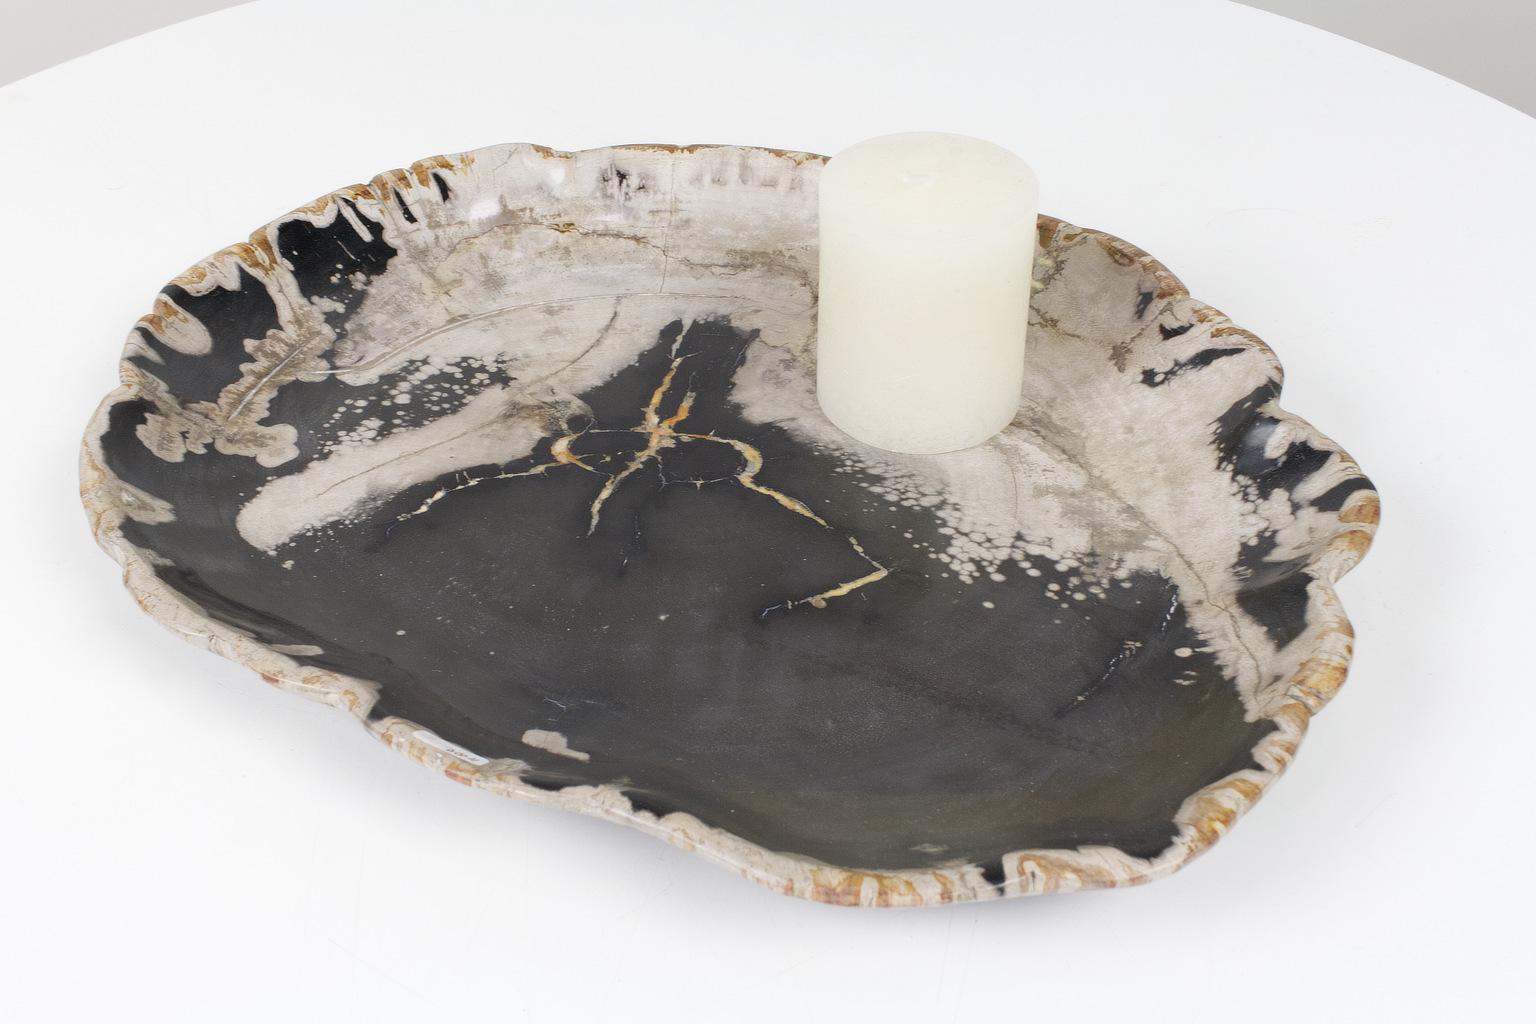 Smooth sanded, petrified wooden plate (or dish) in black and beige tones. The listed item is of organic origin, and was shaped during an organic (and natural) mineralization process, that transforms organic material (in this case wood) into a stone